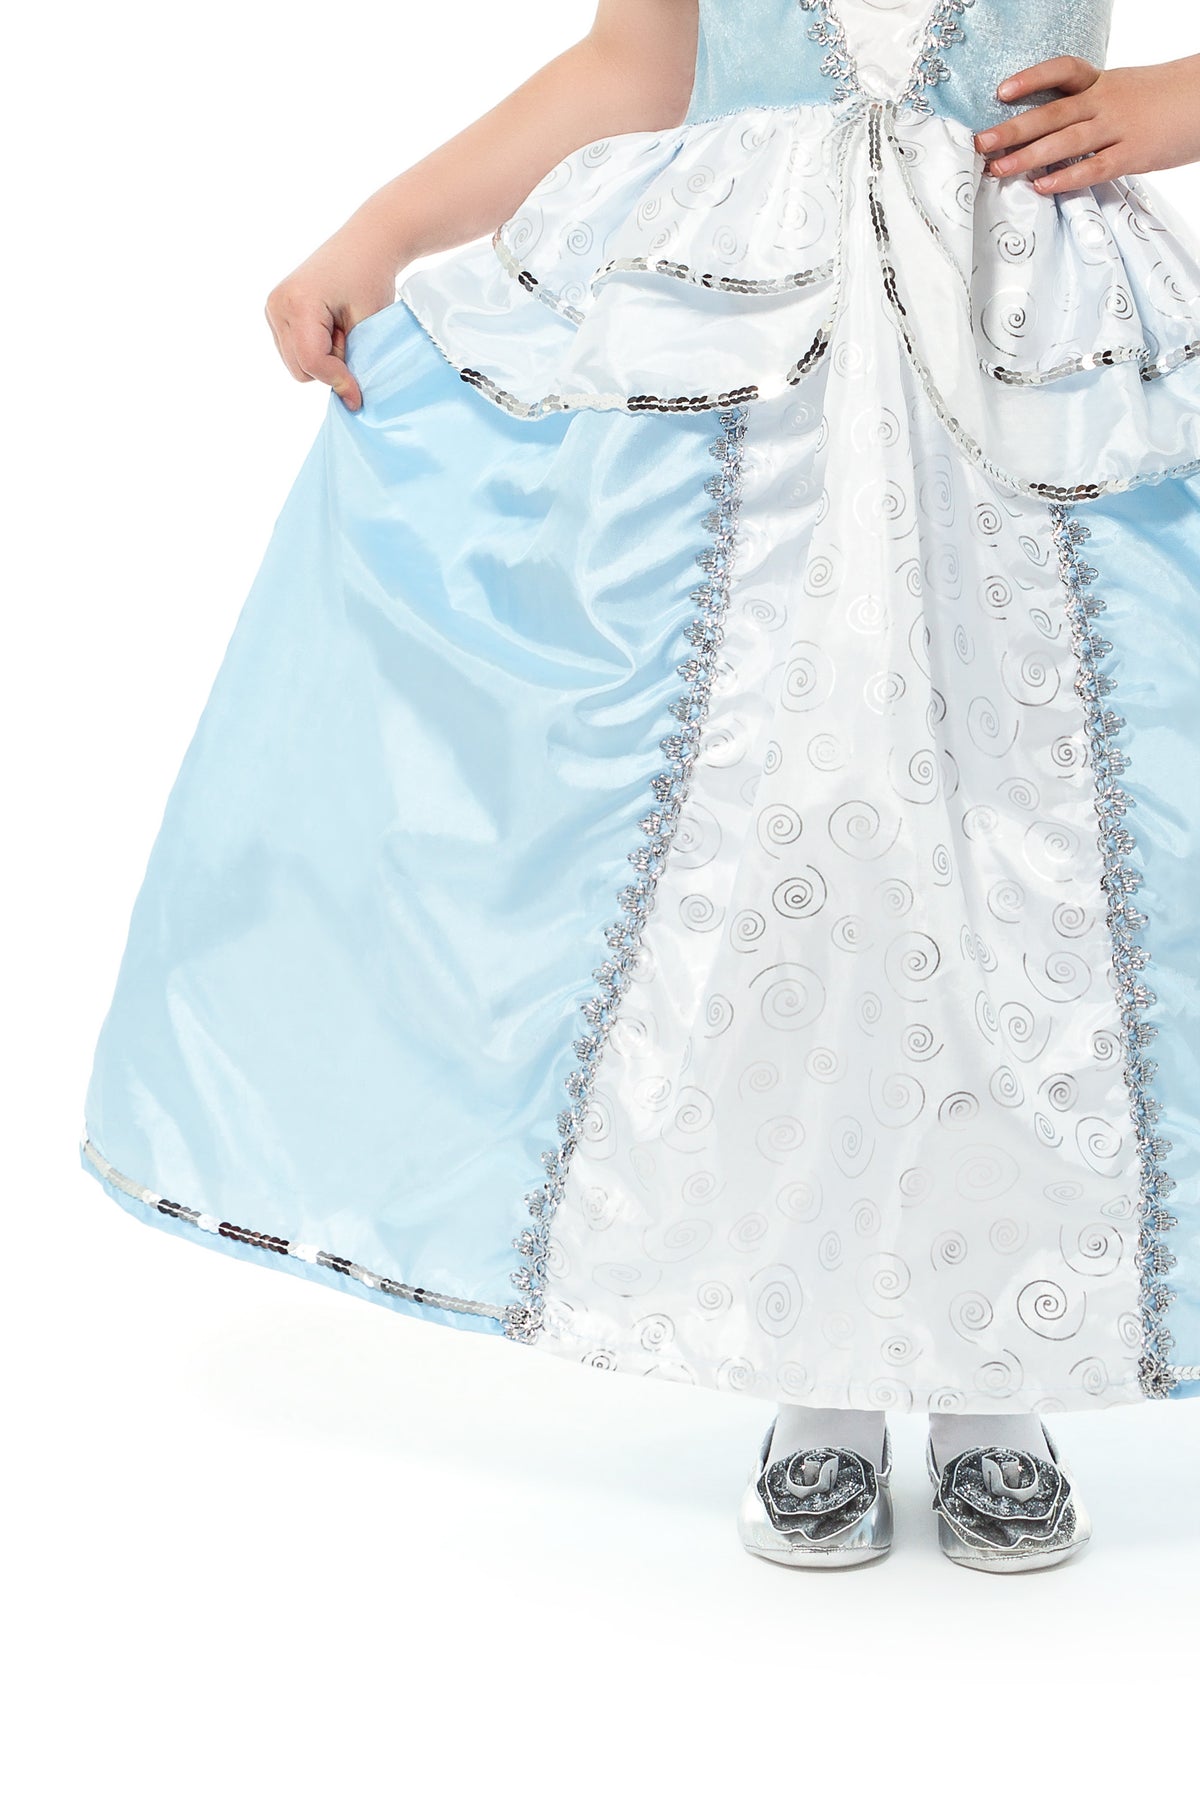 Buy Tacobear Cinderella Costume for Girls Dress Online at Low Prices in  India - Amazon.in